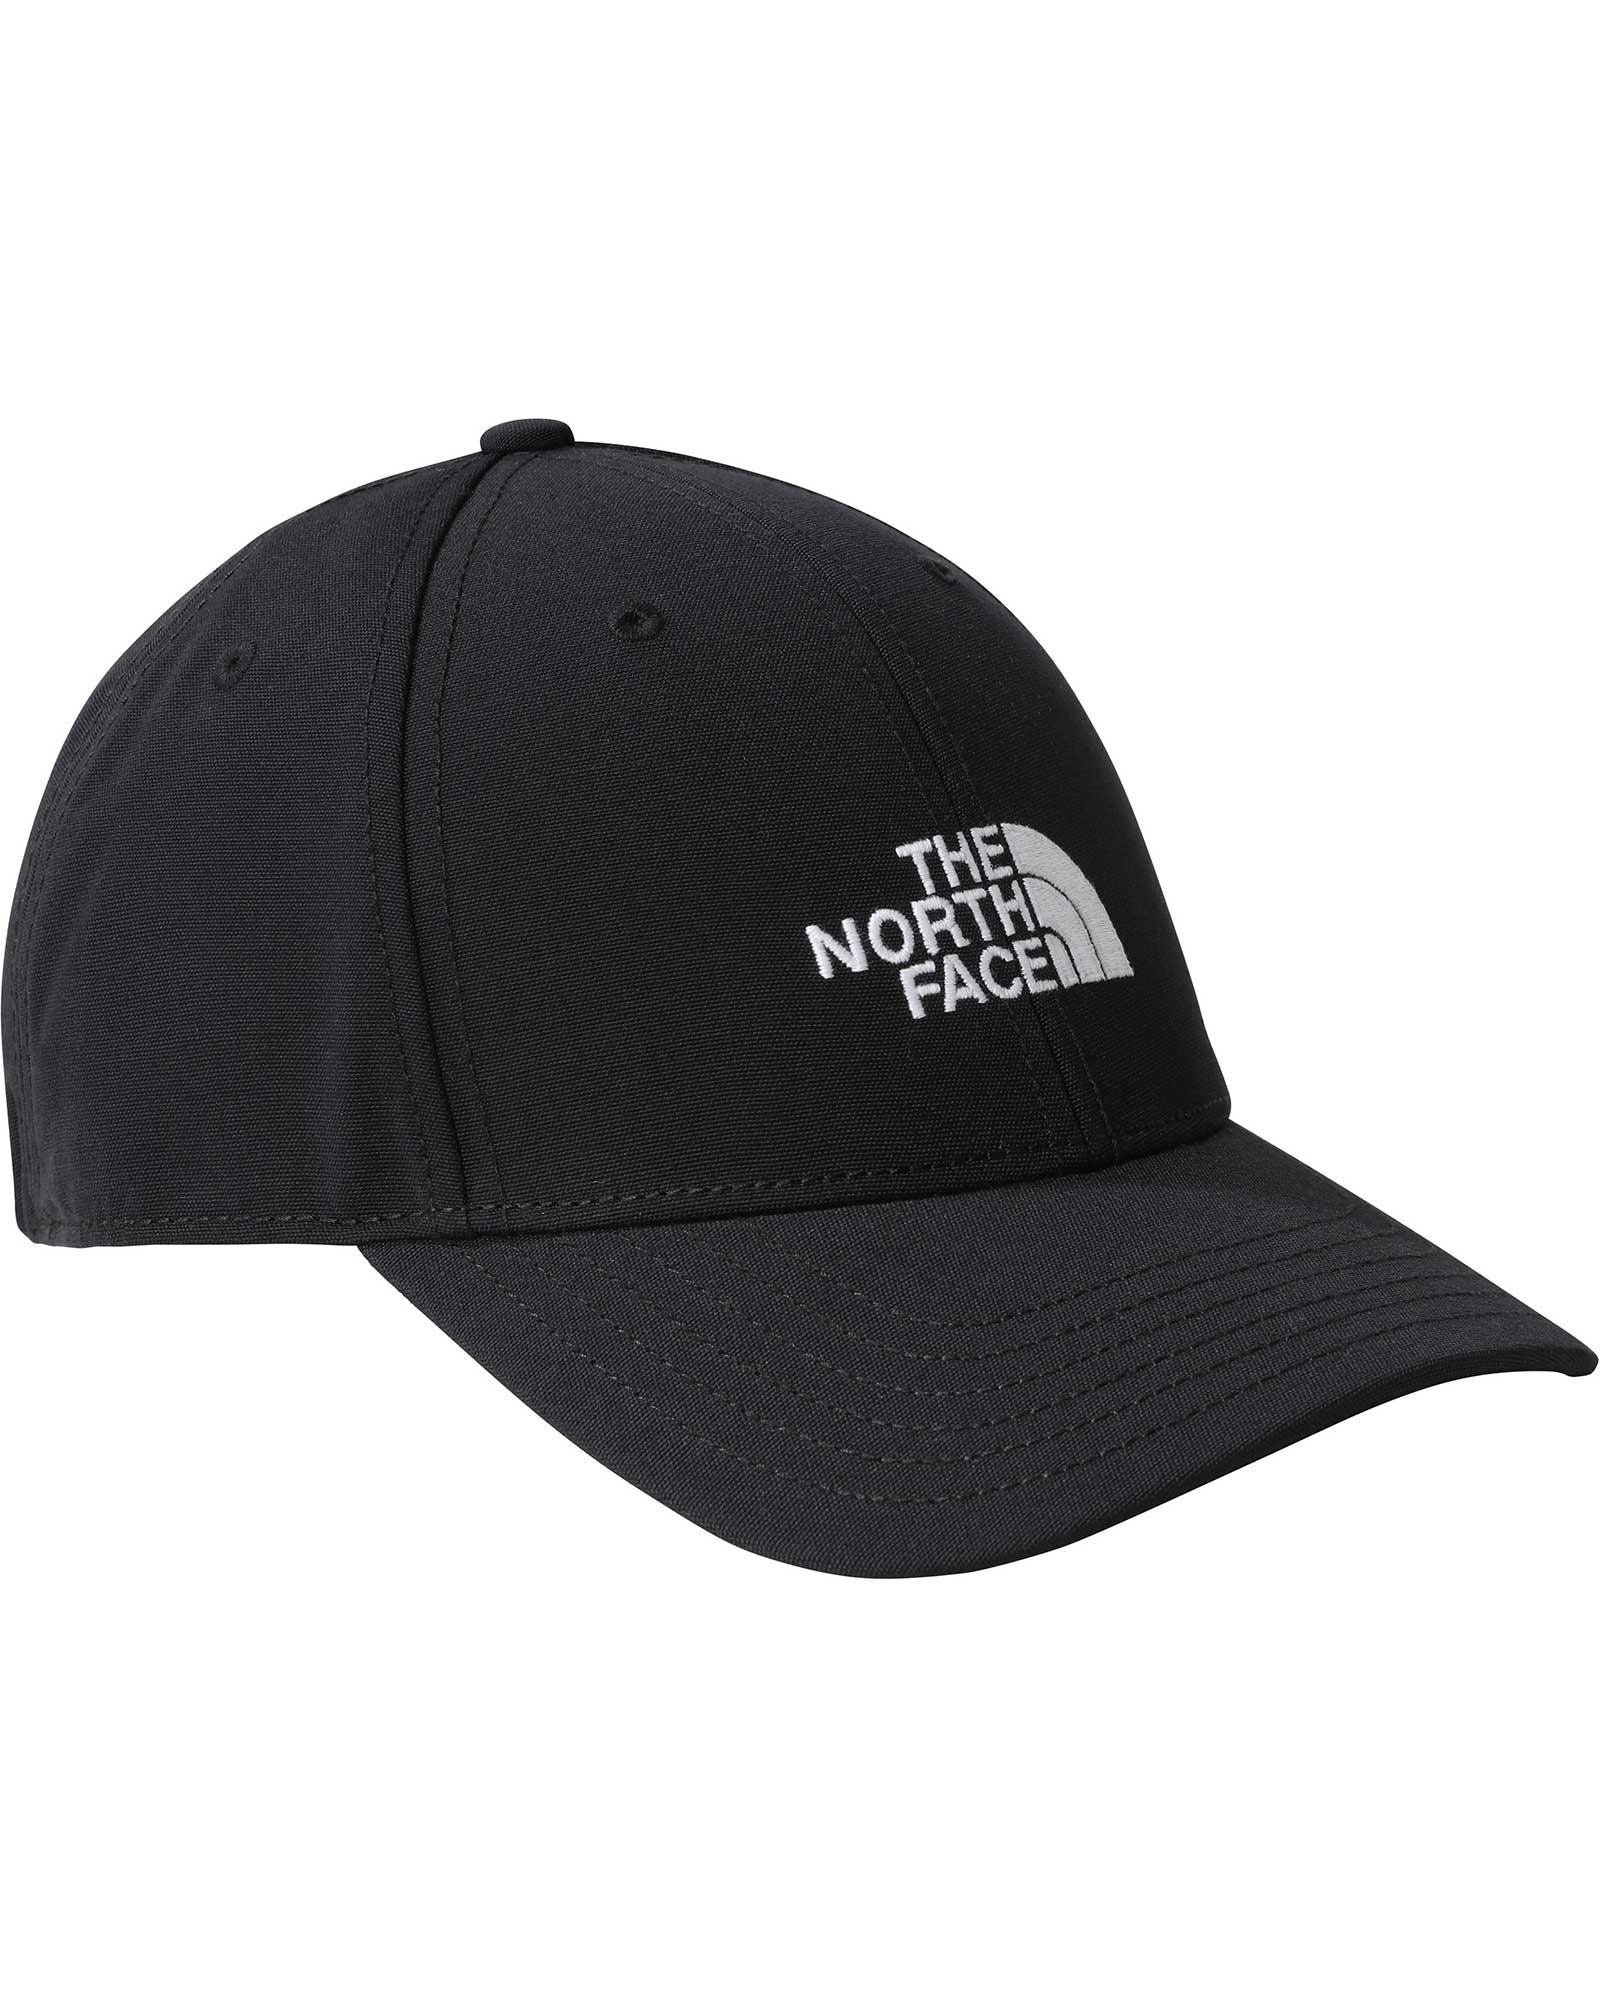 The North Face Classic Recycled 66 Kids' Hat